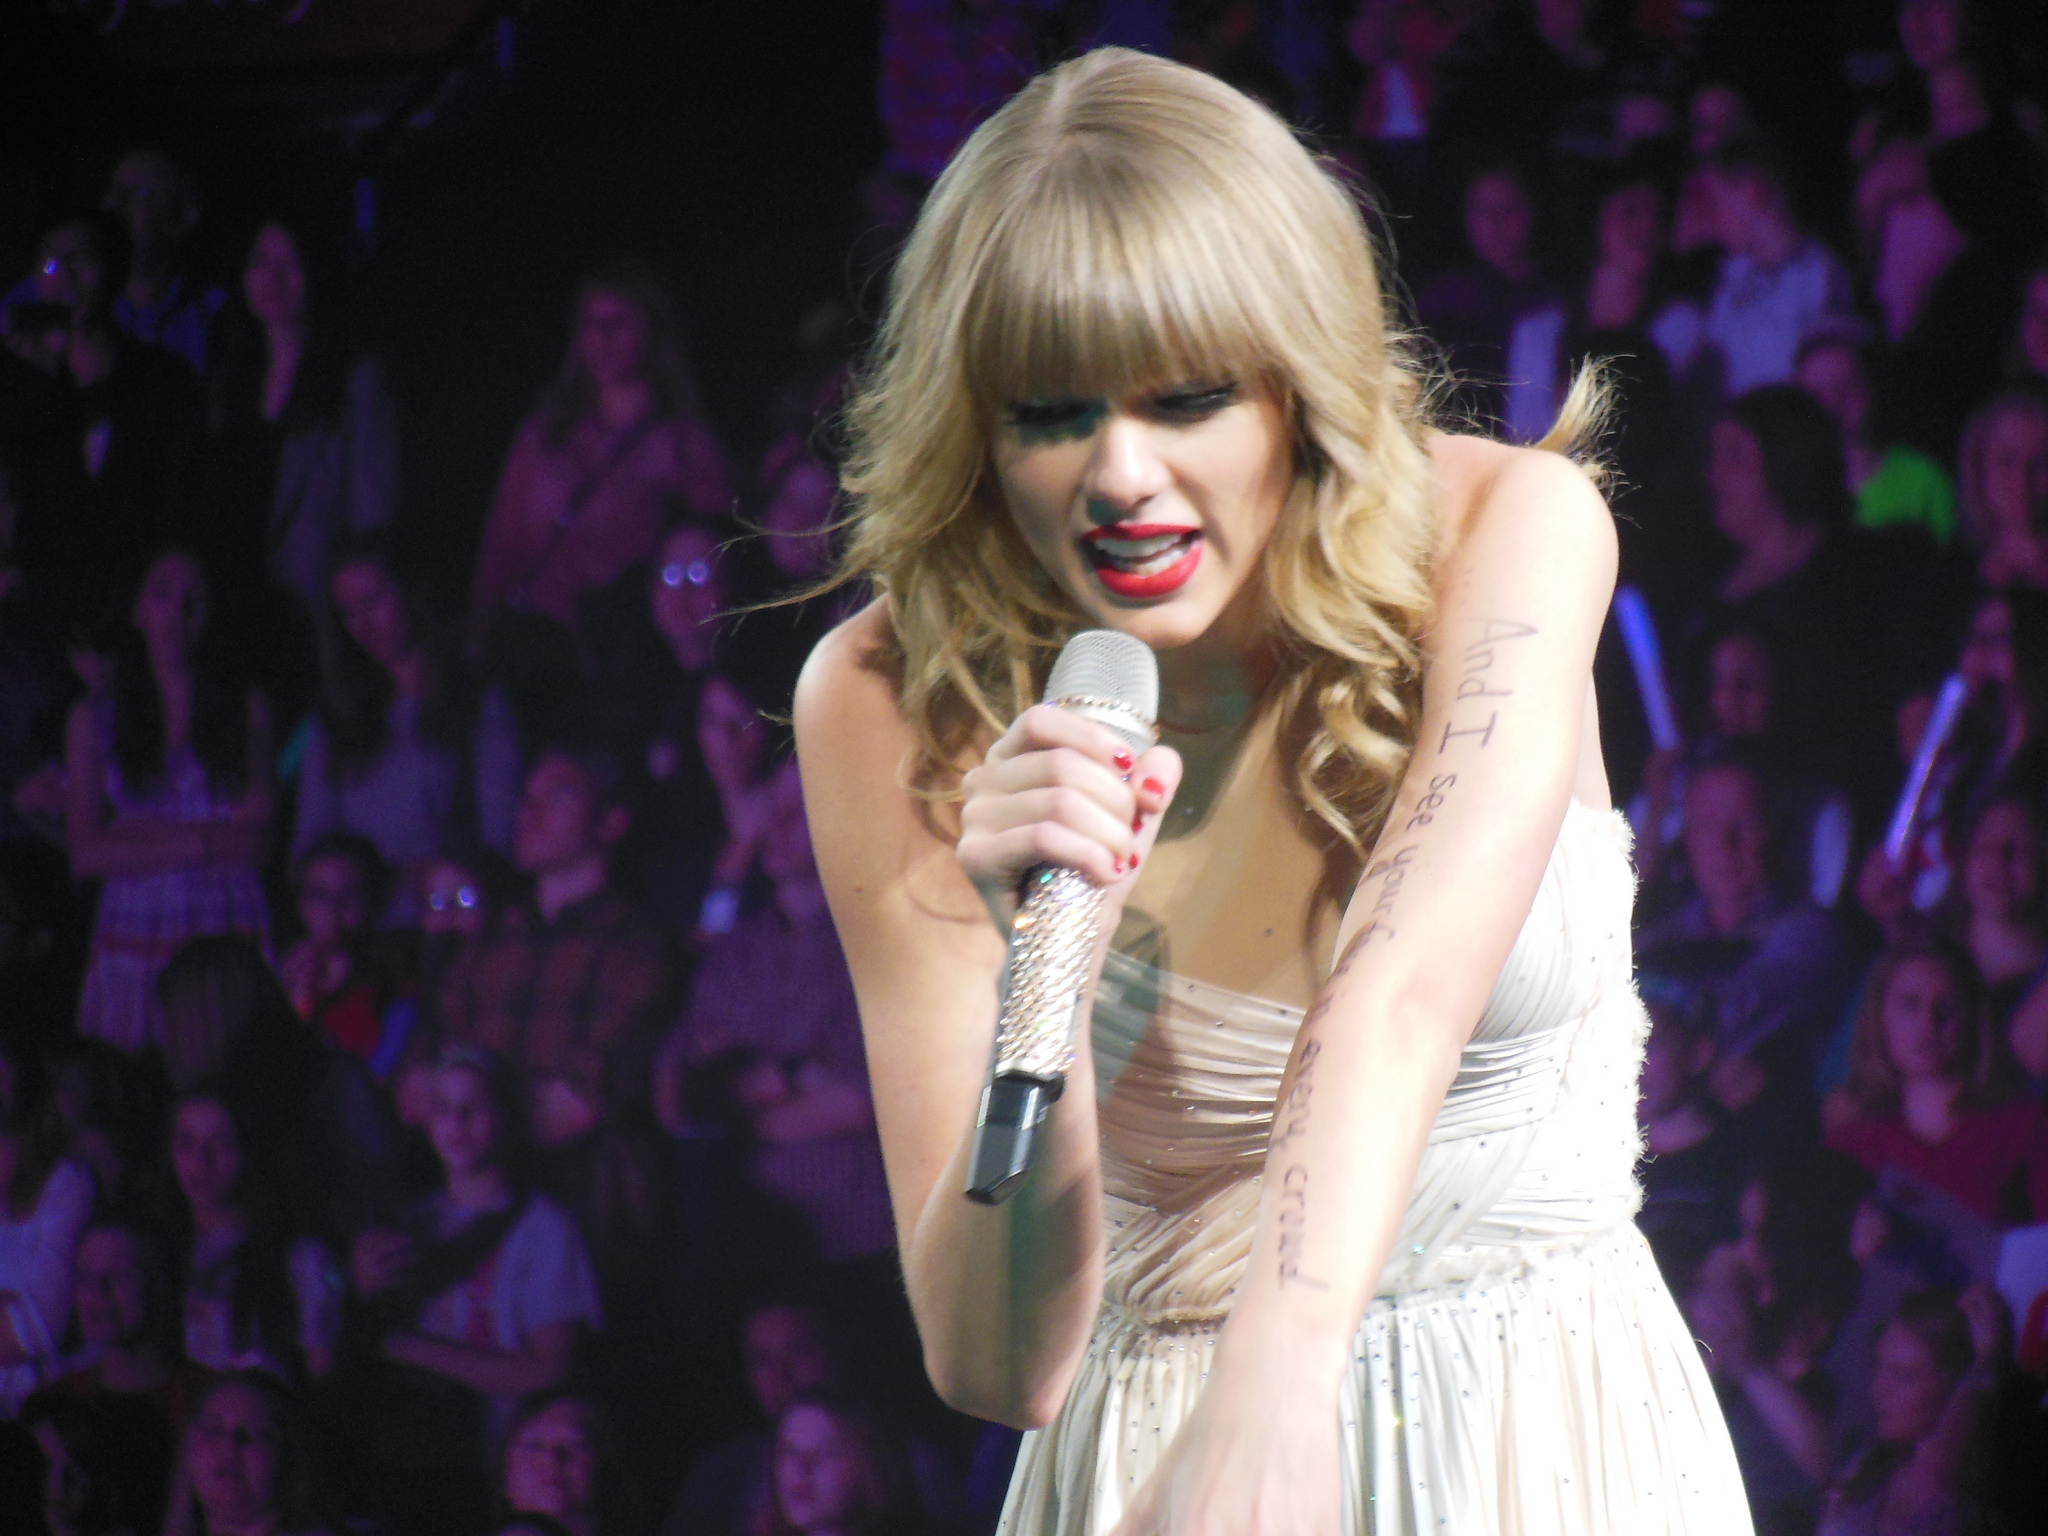 Taylor Swift Red Tour Flawless Execution At The Rogers Centre Blogtopus Blues